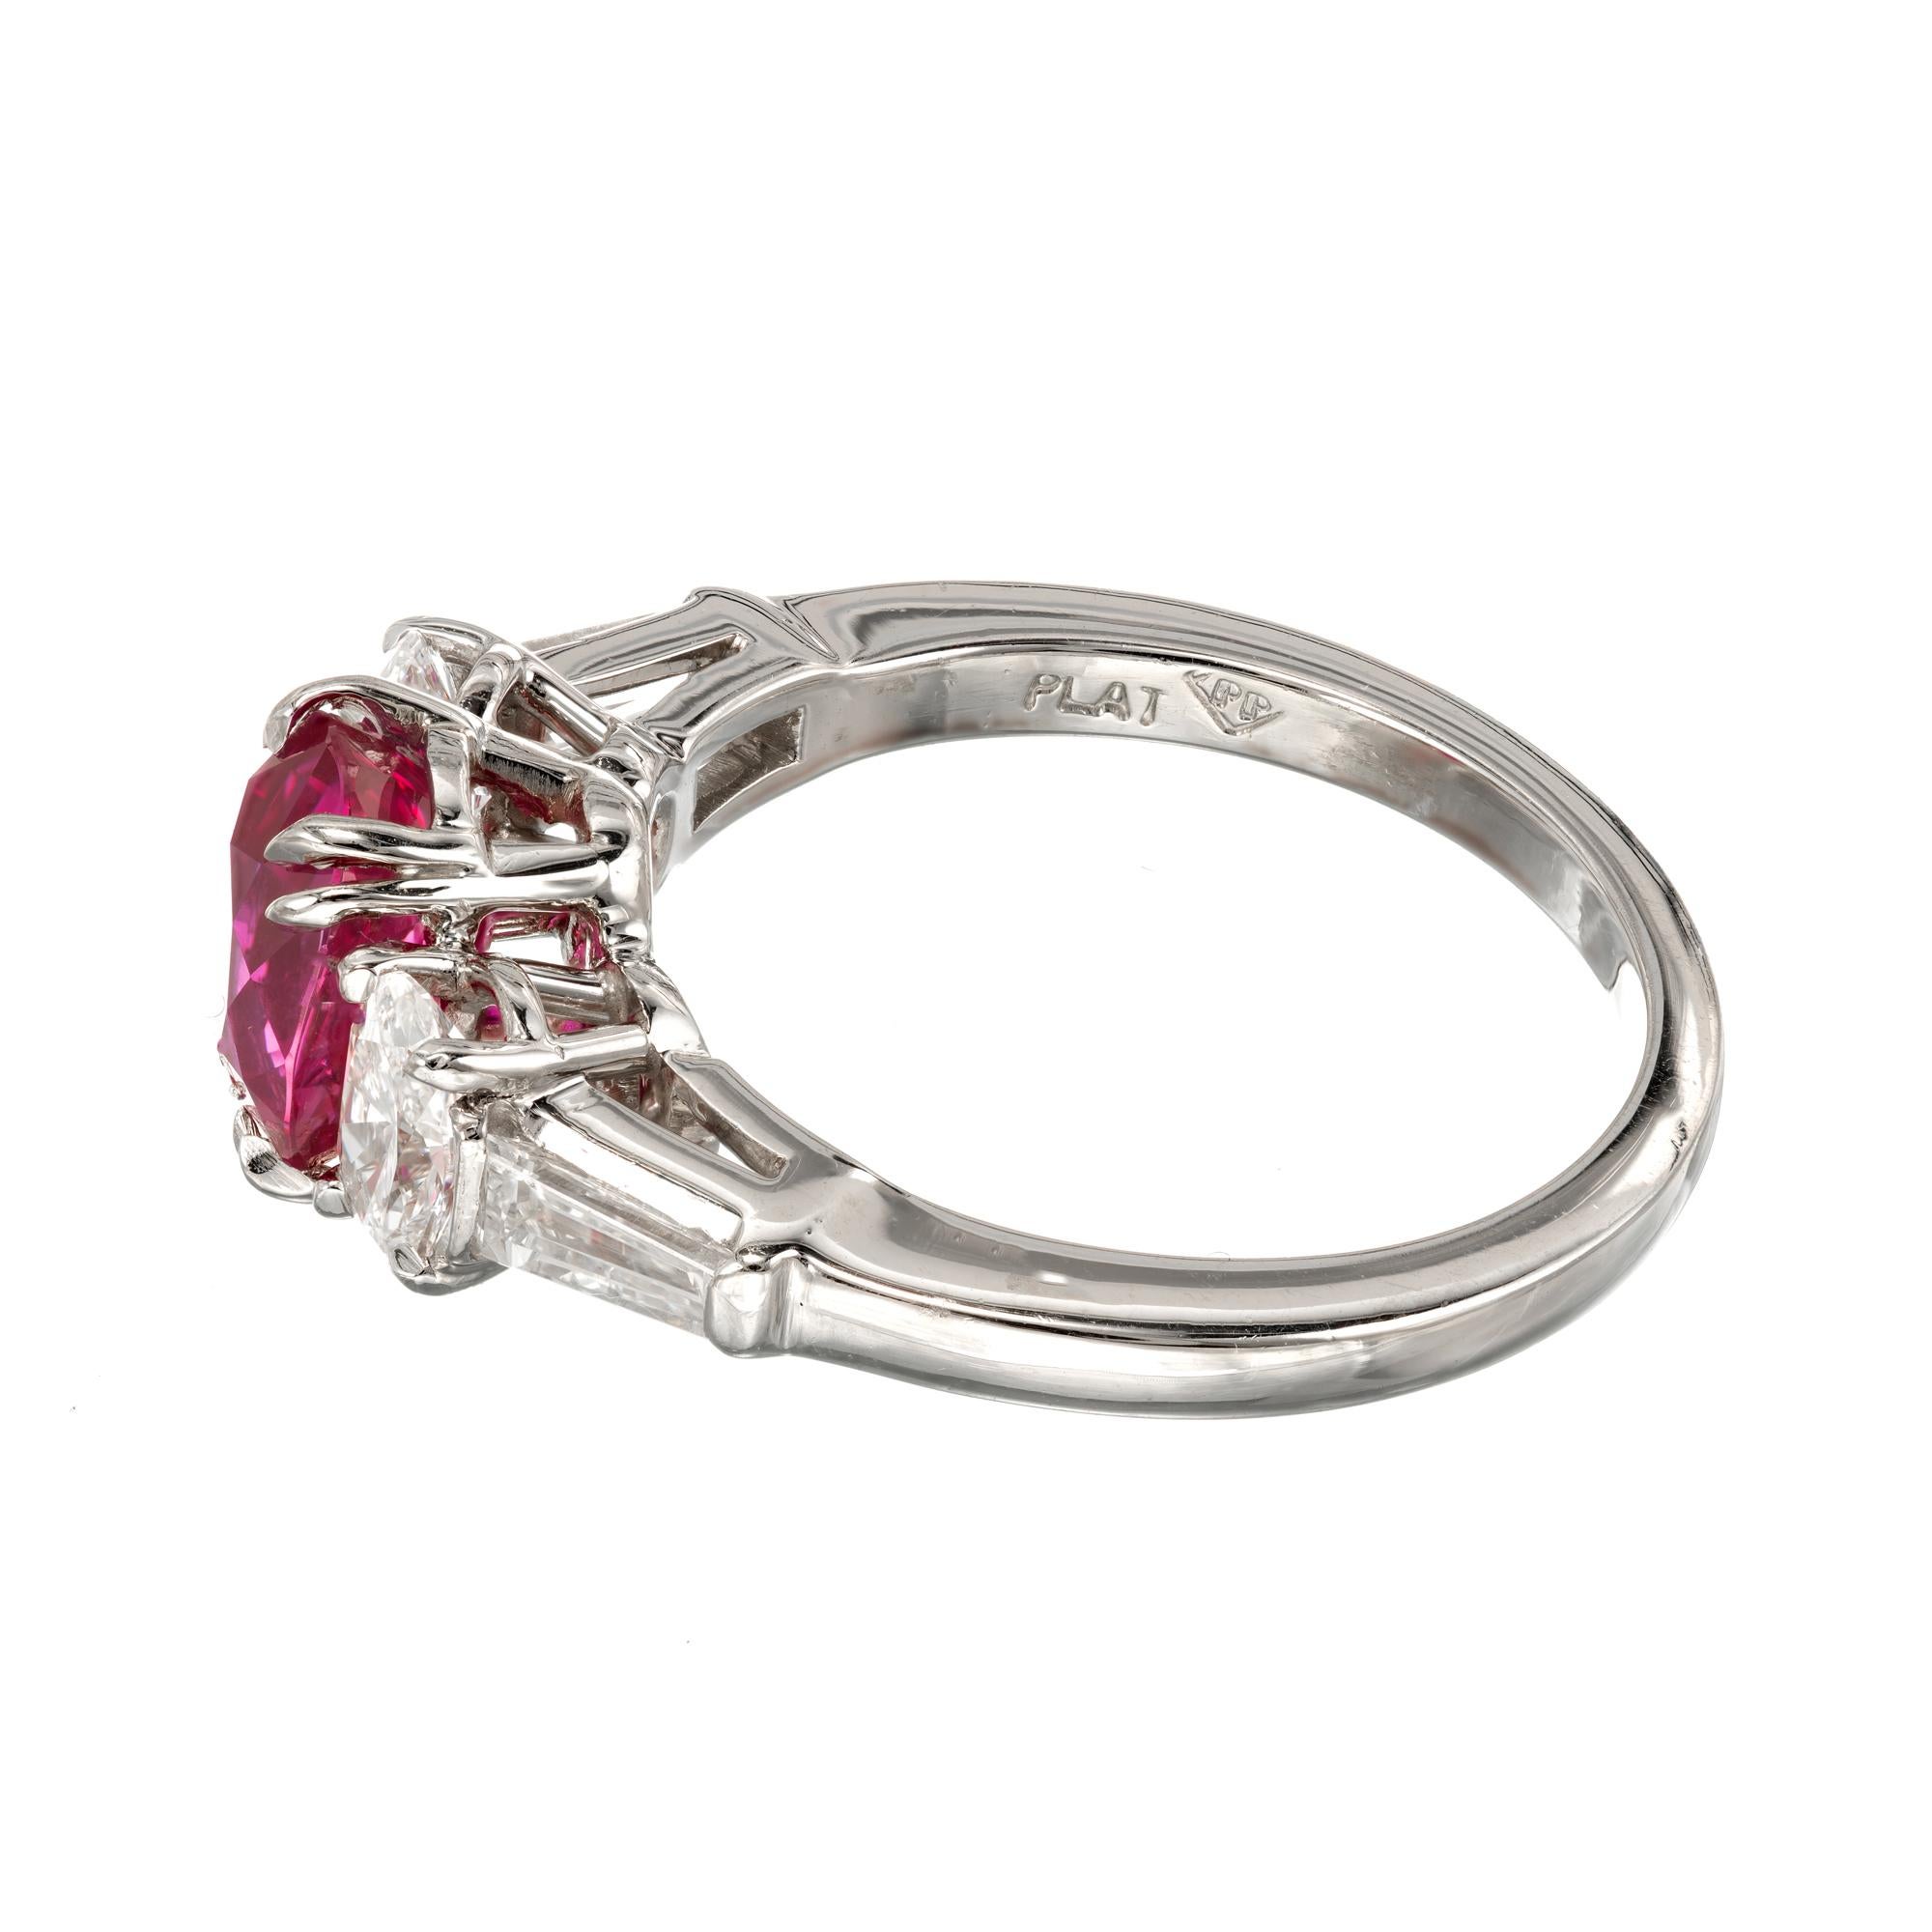 Peter Suchy 2.23 Carat Burma Myanmar Red Ruby Diamond Platinum Engagement Ring In Excellent Condition For Sale In Stamford, CT